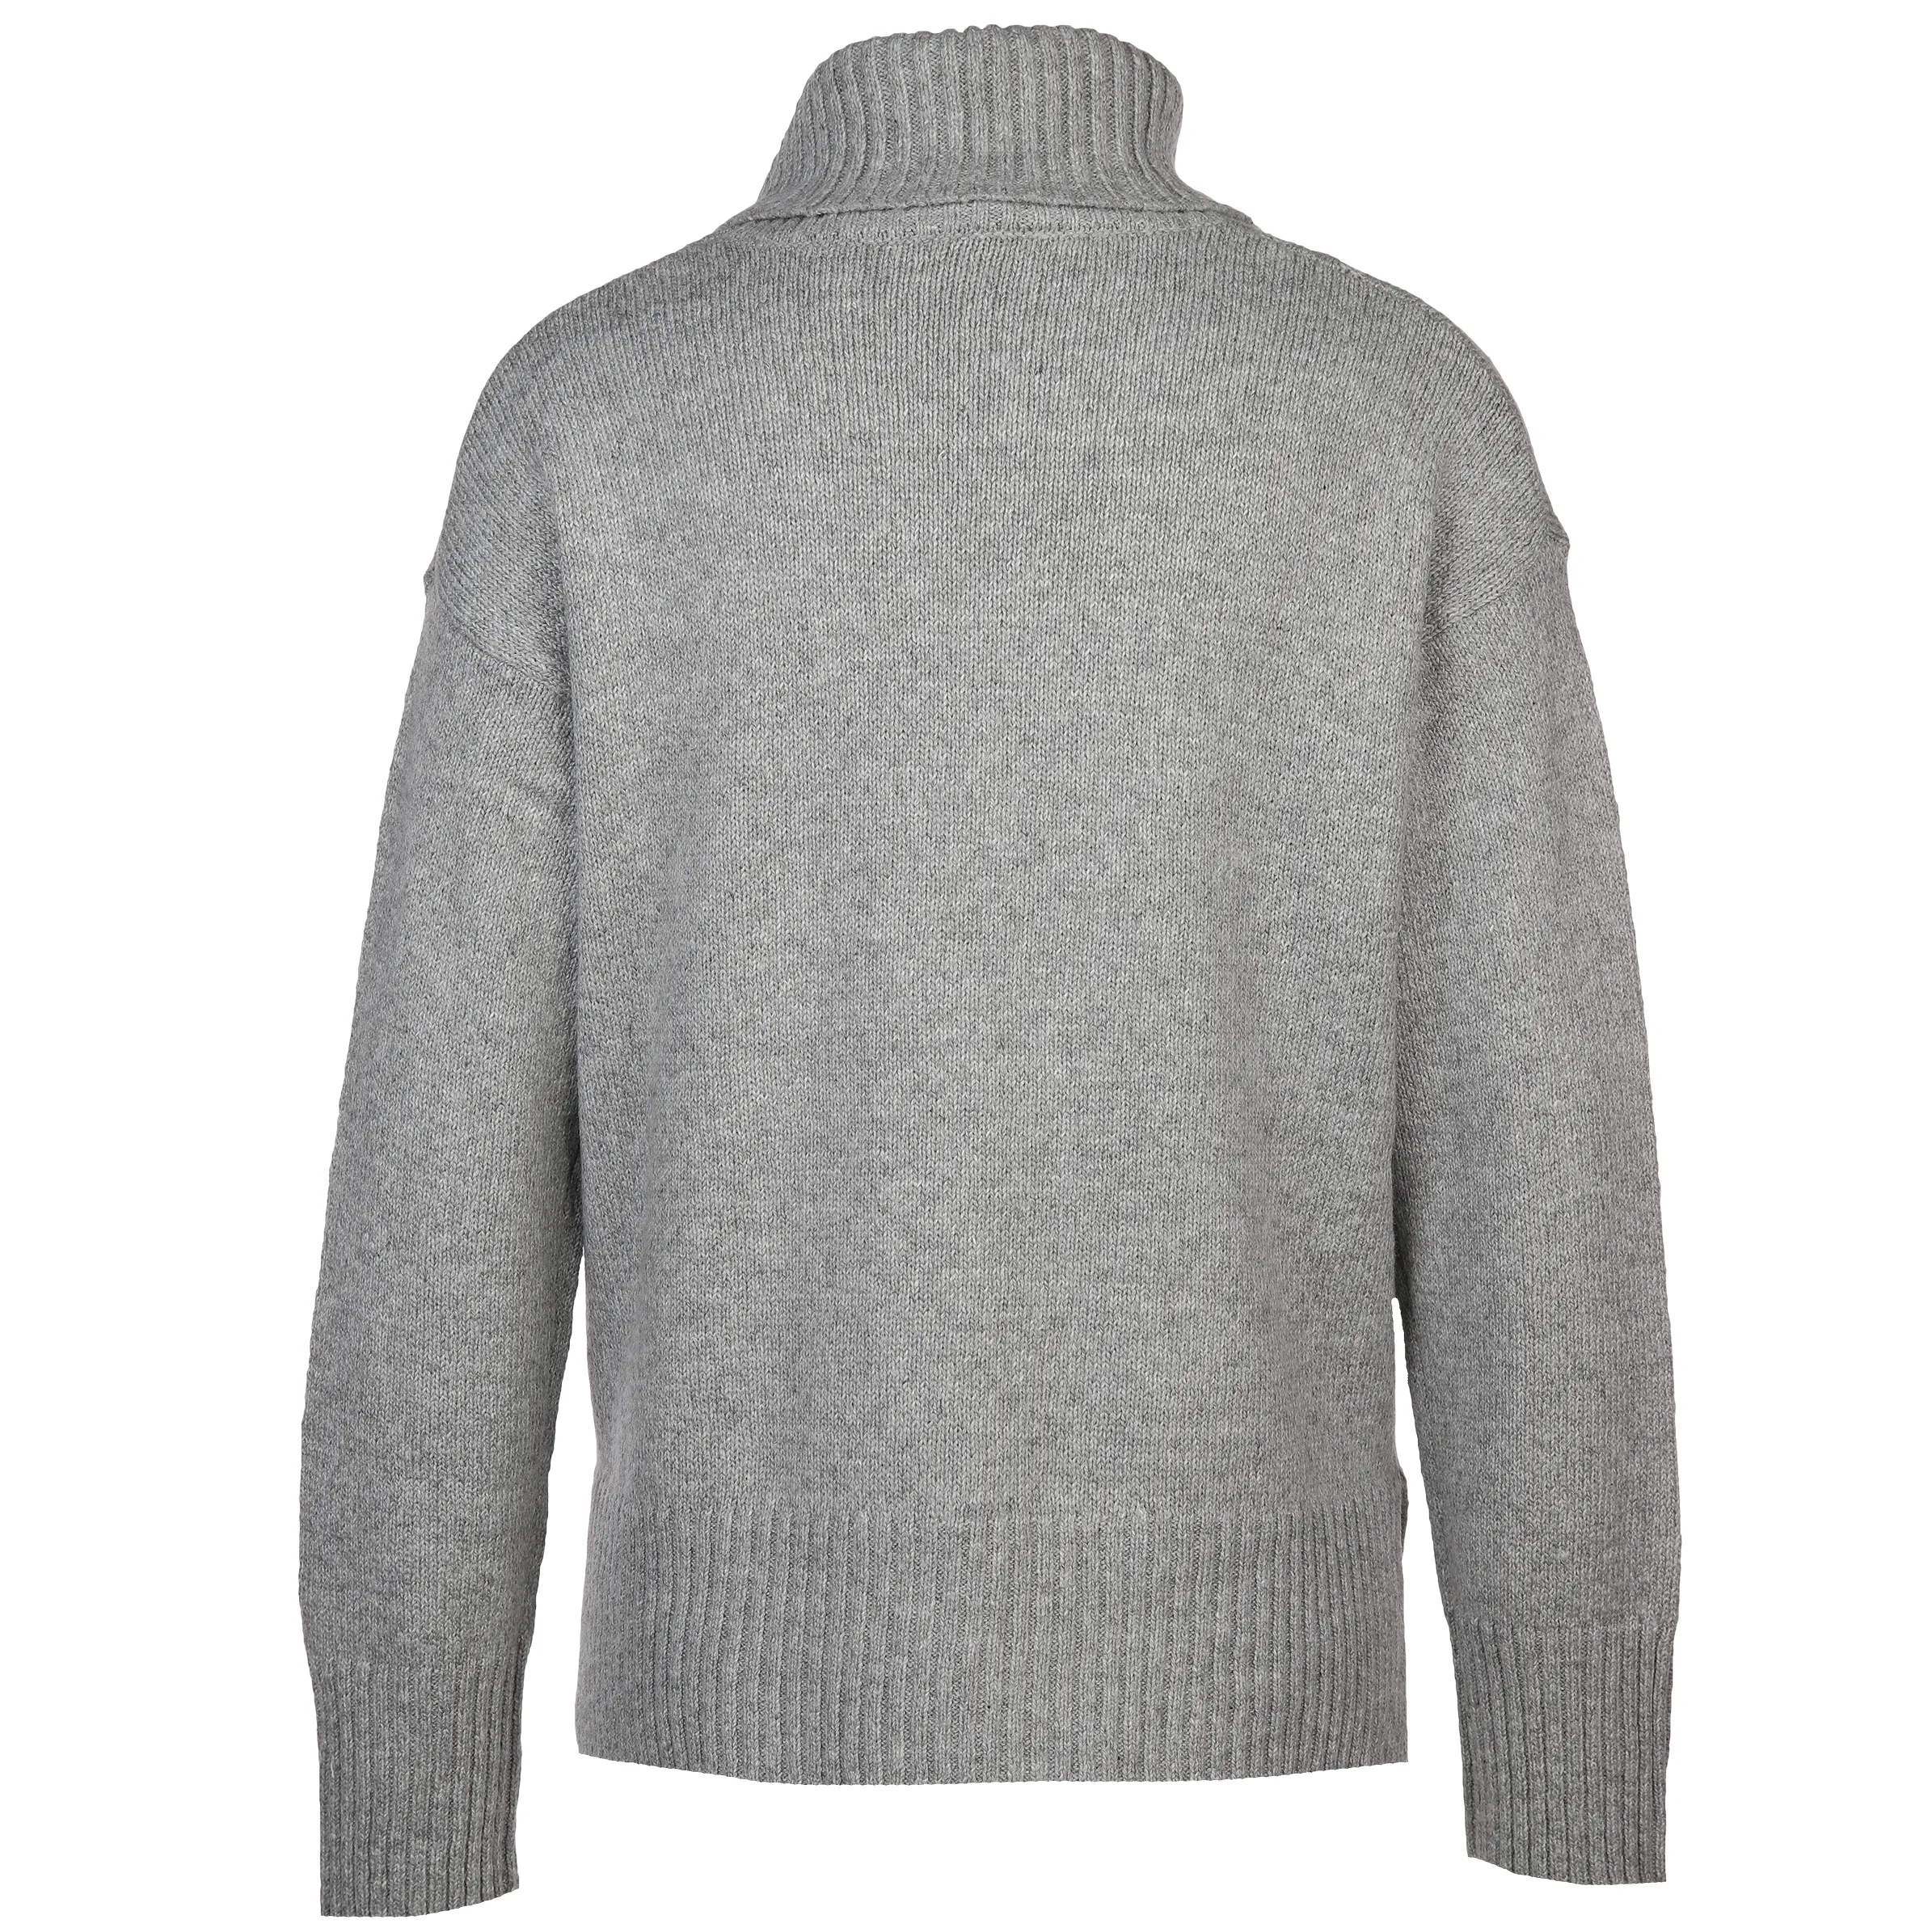 Tom Tailor 1041157 Knit pullover cable turtleneck Grau 887440 21373 2